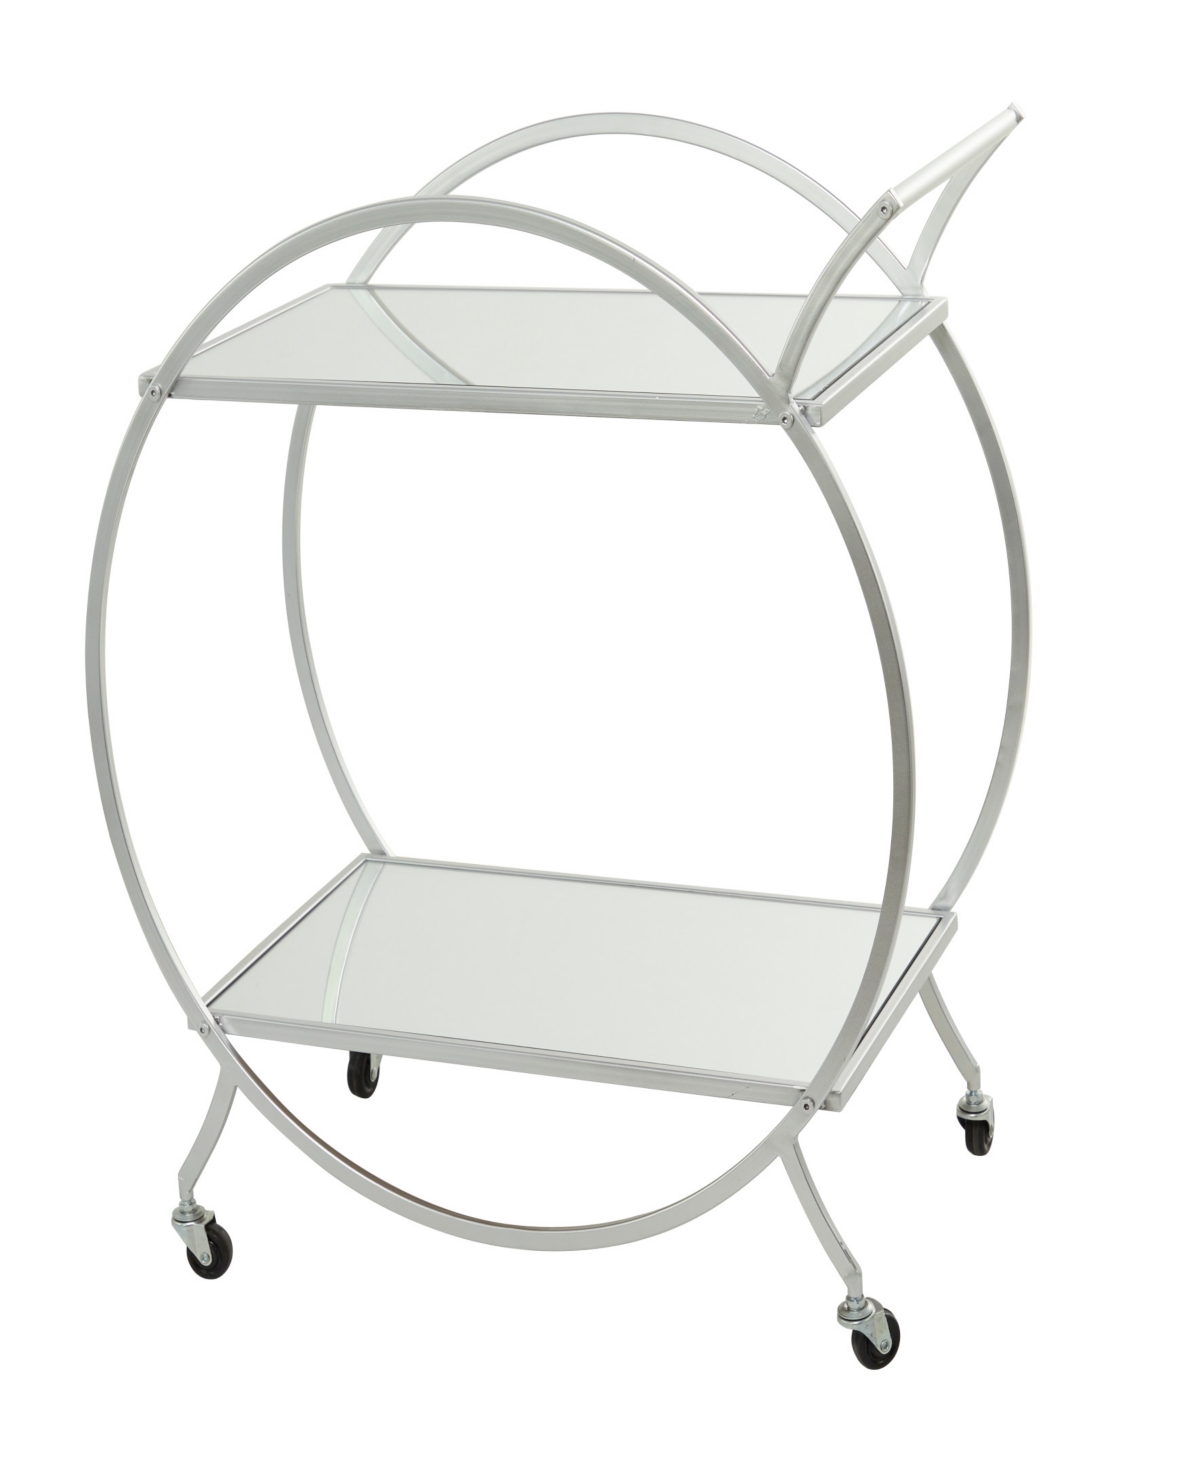 Rosemary Lane 14" X 28" X 30" Iron Rolling With Wheels And Handle 2 Mirrored Shelves Bar Cart In Silver